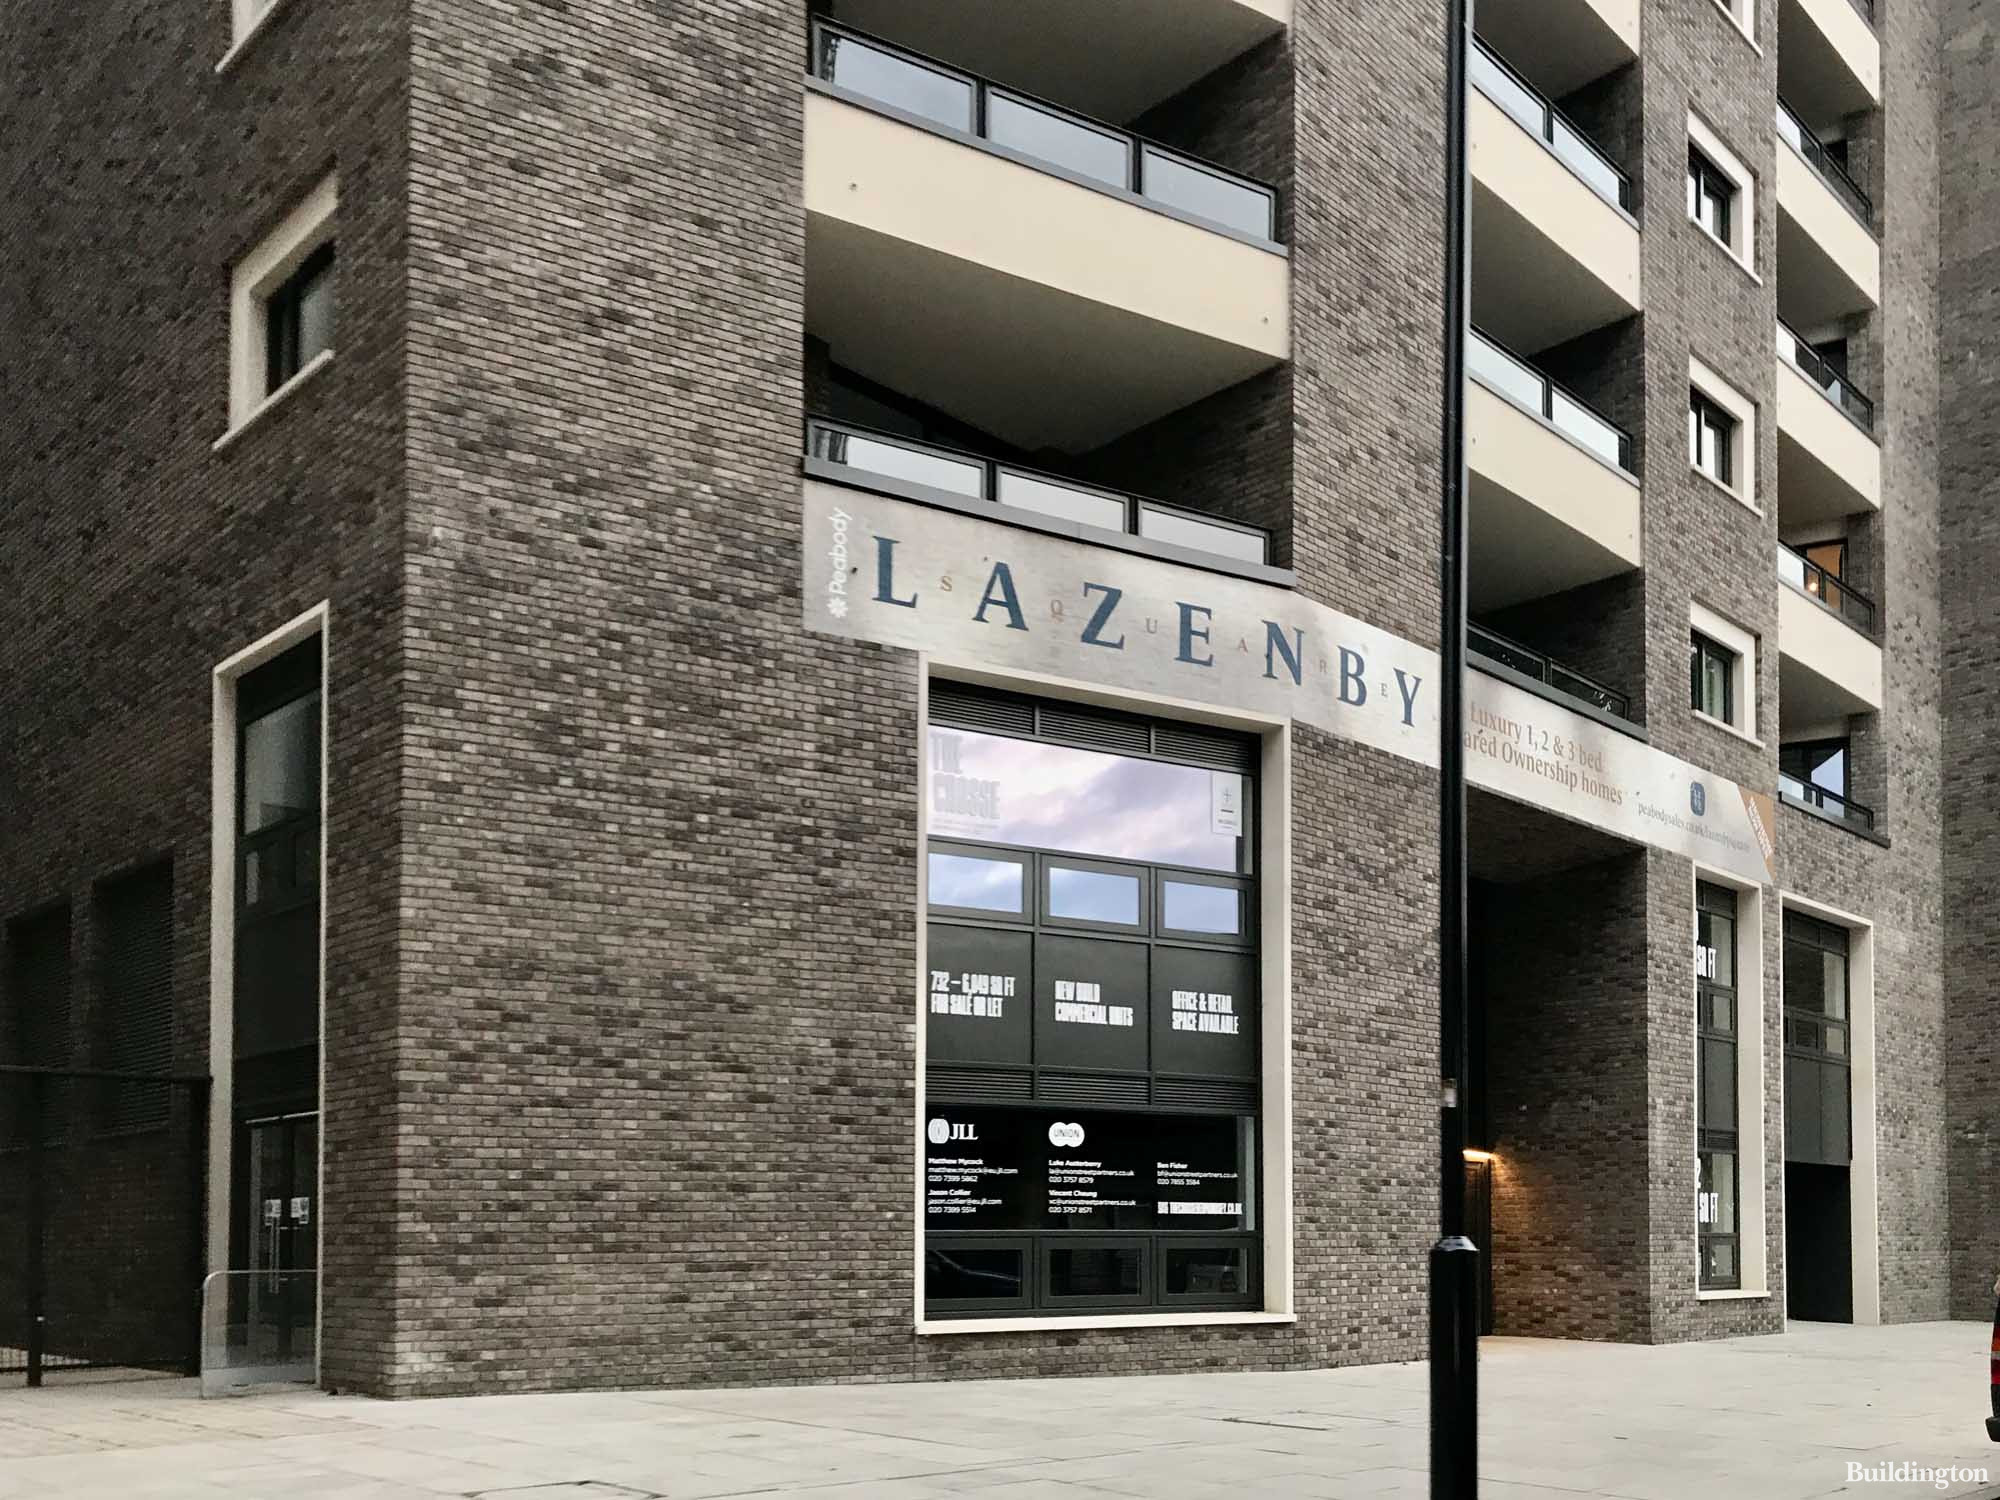 Lazemby Square building by Peabody containing Shared Ownership apartments on Grange Road in Bermonsey, London SE1.